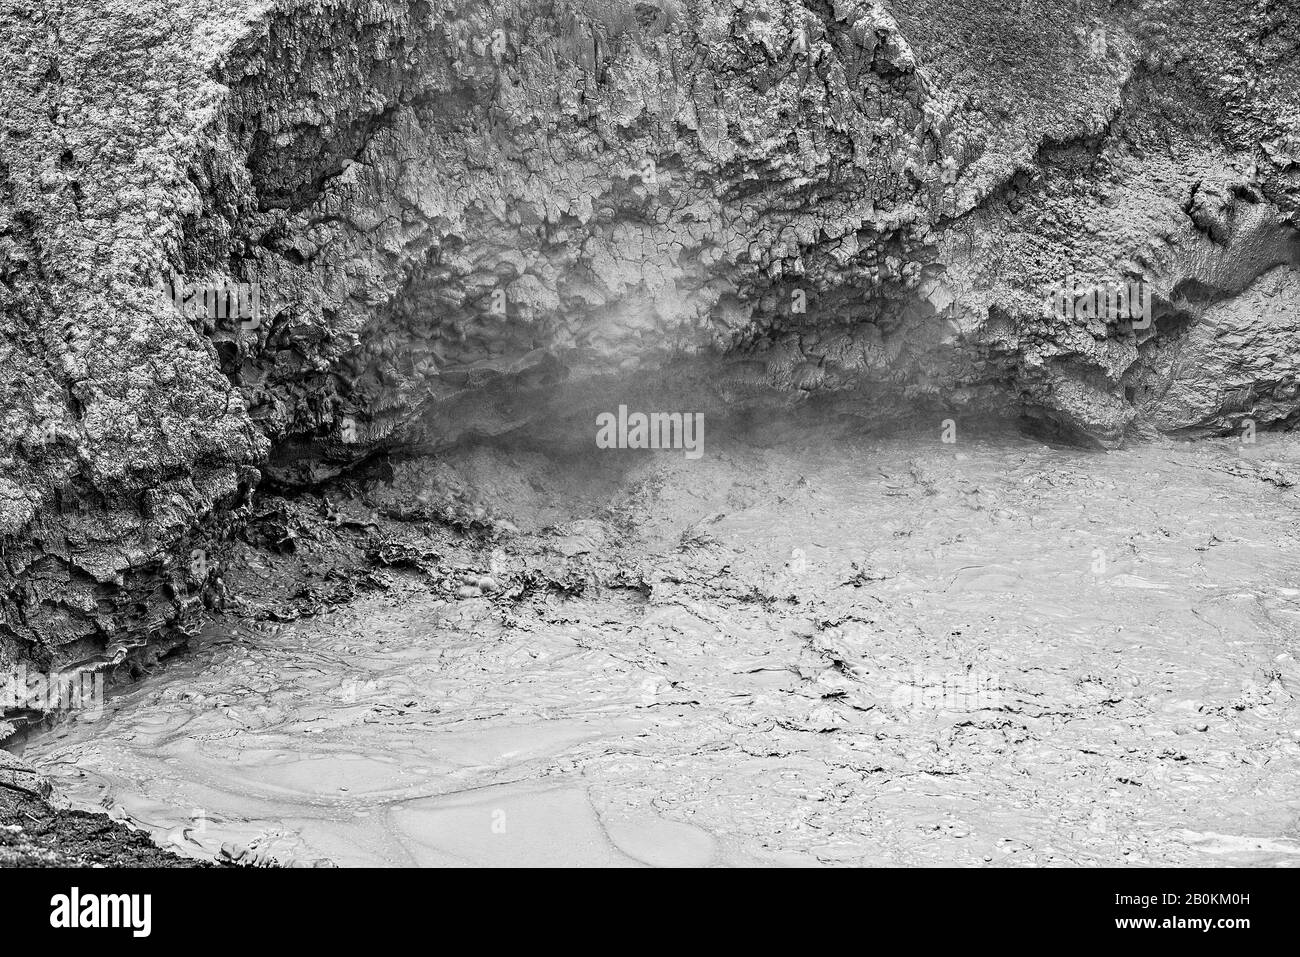 Mud pot spewing off hot gases and steam. Stock Photo